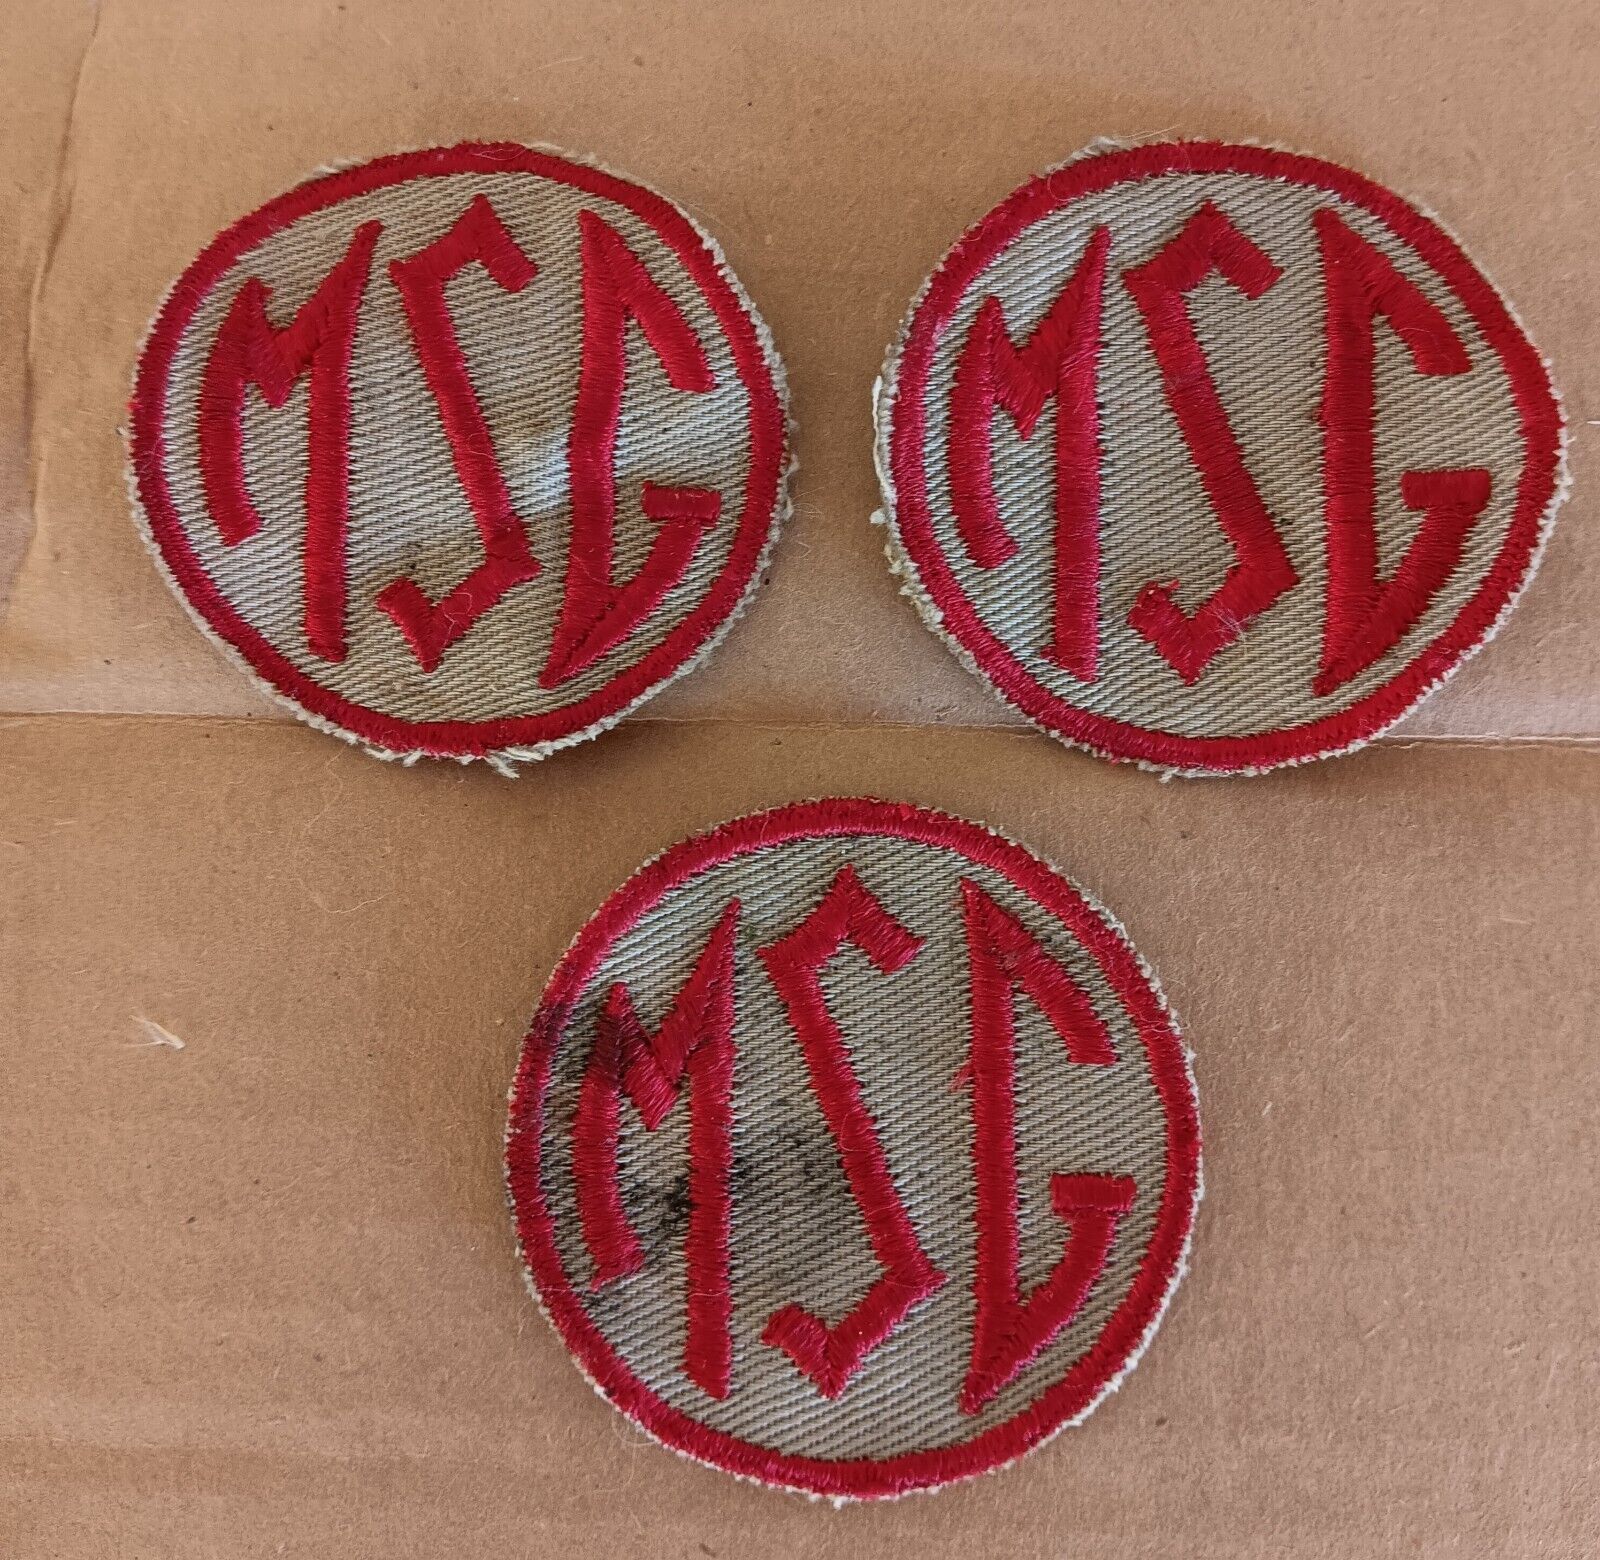 RARE ORIGINAL EMBROIDERED TWILL WW2 MISSISSIPPI STATE GUARD PATCH LOT